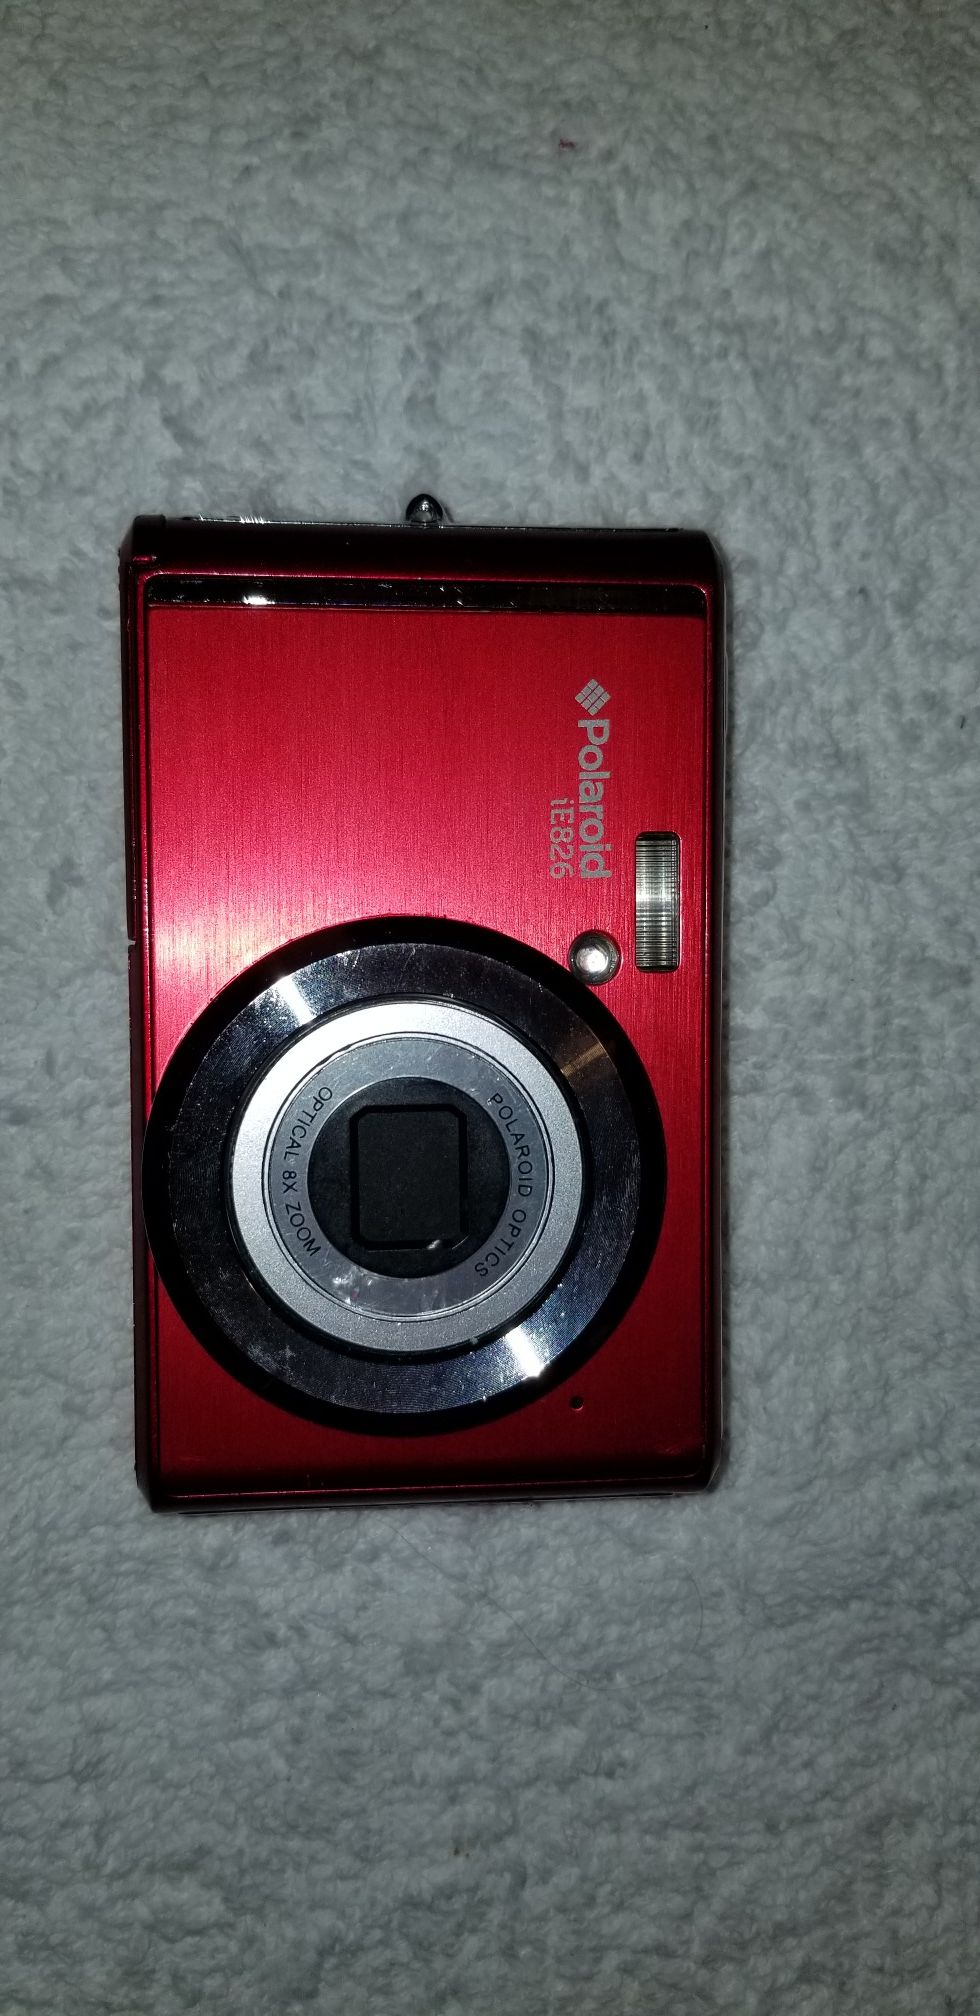 POLAROID IE826-RED 18MP DIGITAL STILL CAMERA with 2.4in Screen RED